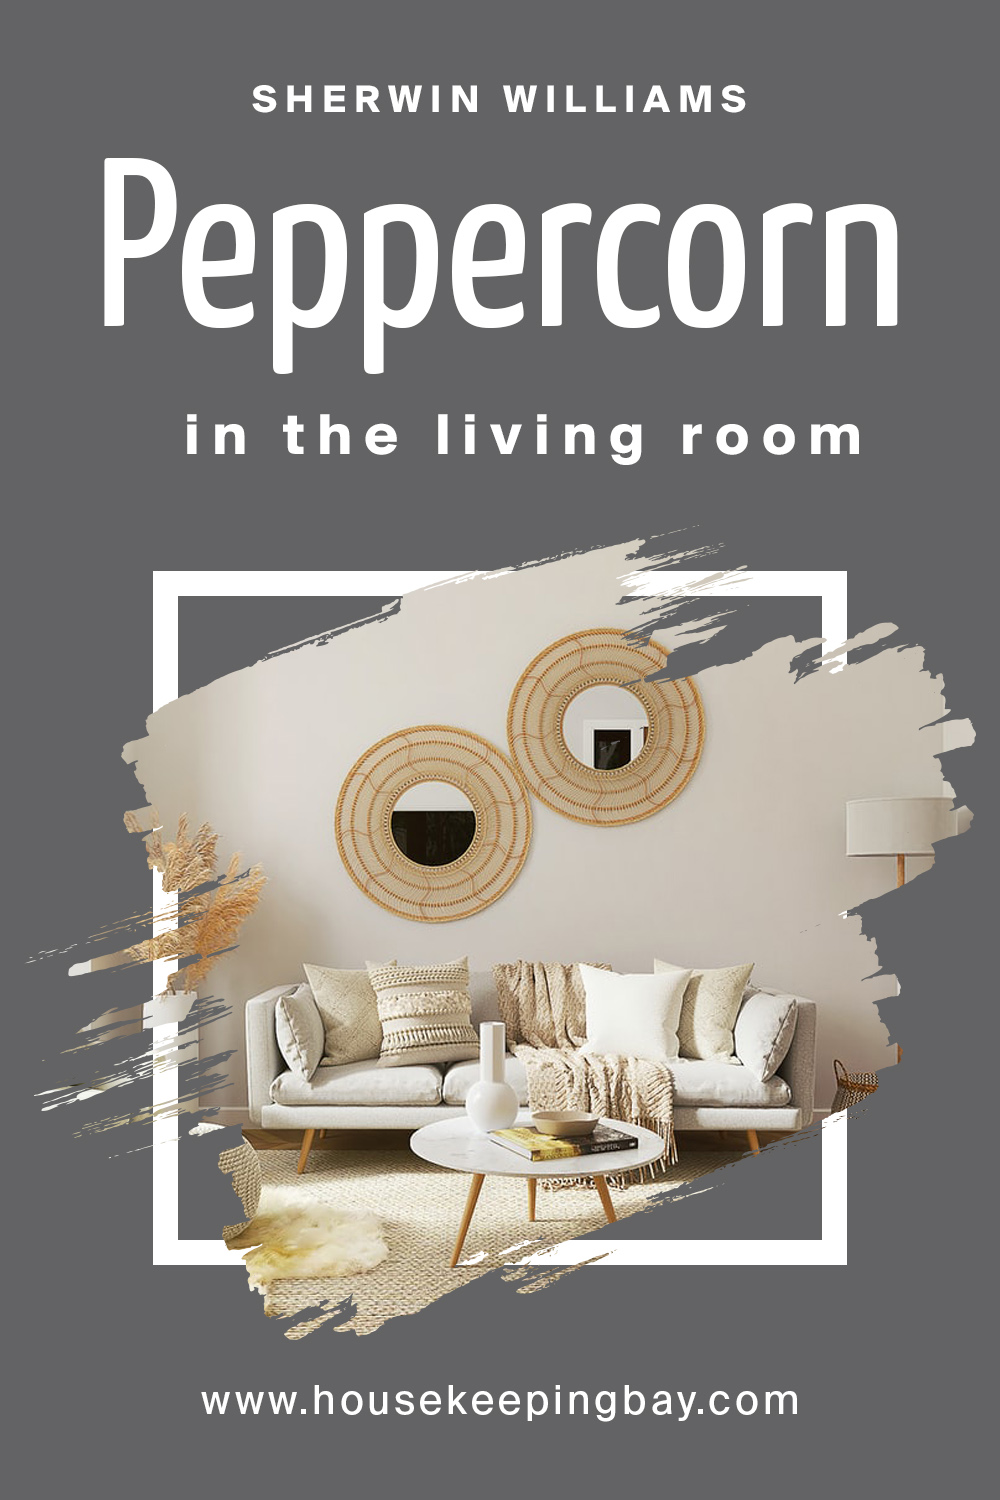 peppercorn by sherwin williams in the living room